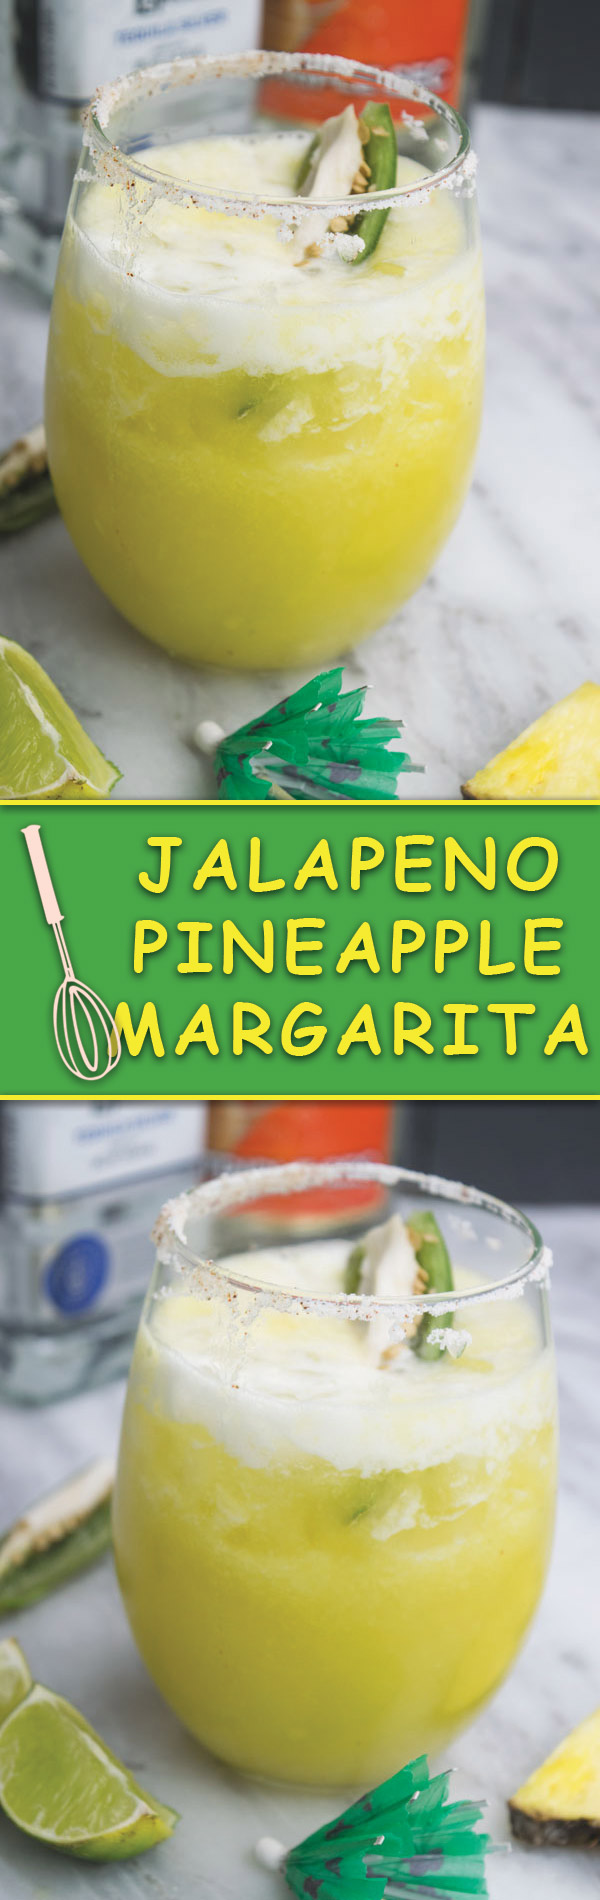 Jalapeno pineapple margarita - Jalapeno infused tequila, fresh pineapple, all blended into this fun margarita that is great for relaxing or for gatherings! Just 10 mins is what you need!